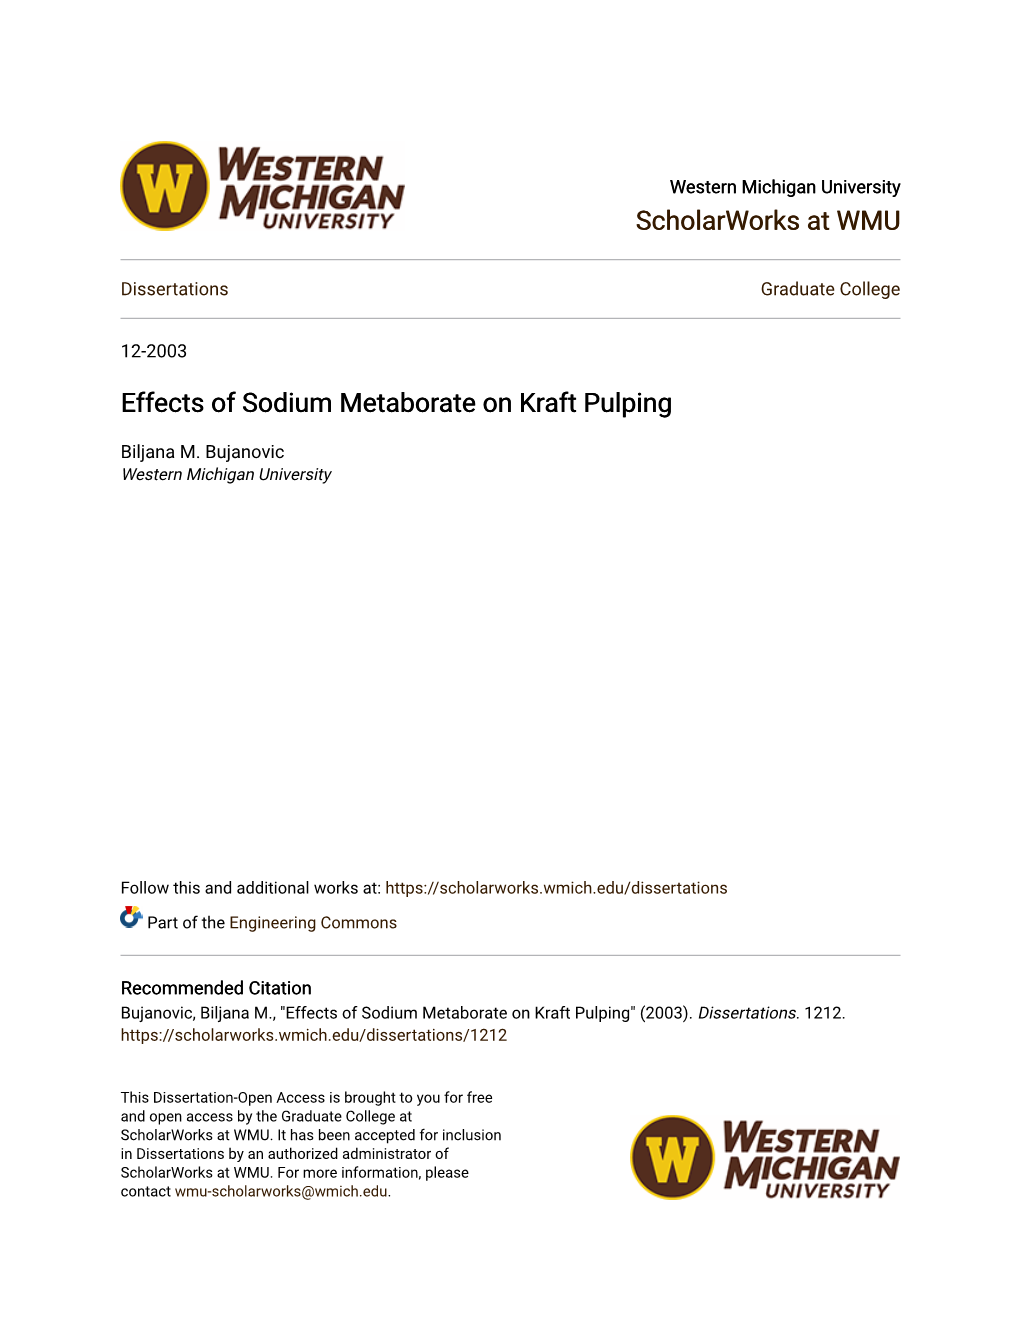 Effects of Sodium Metaborate on Kraft Pulping